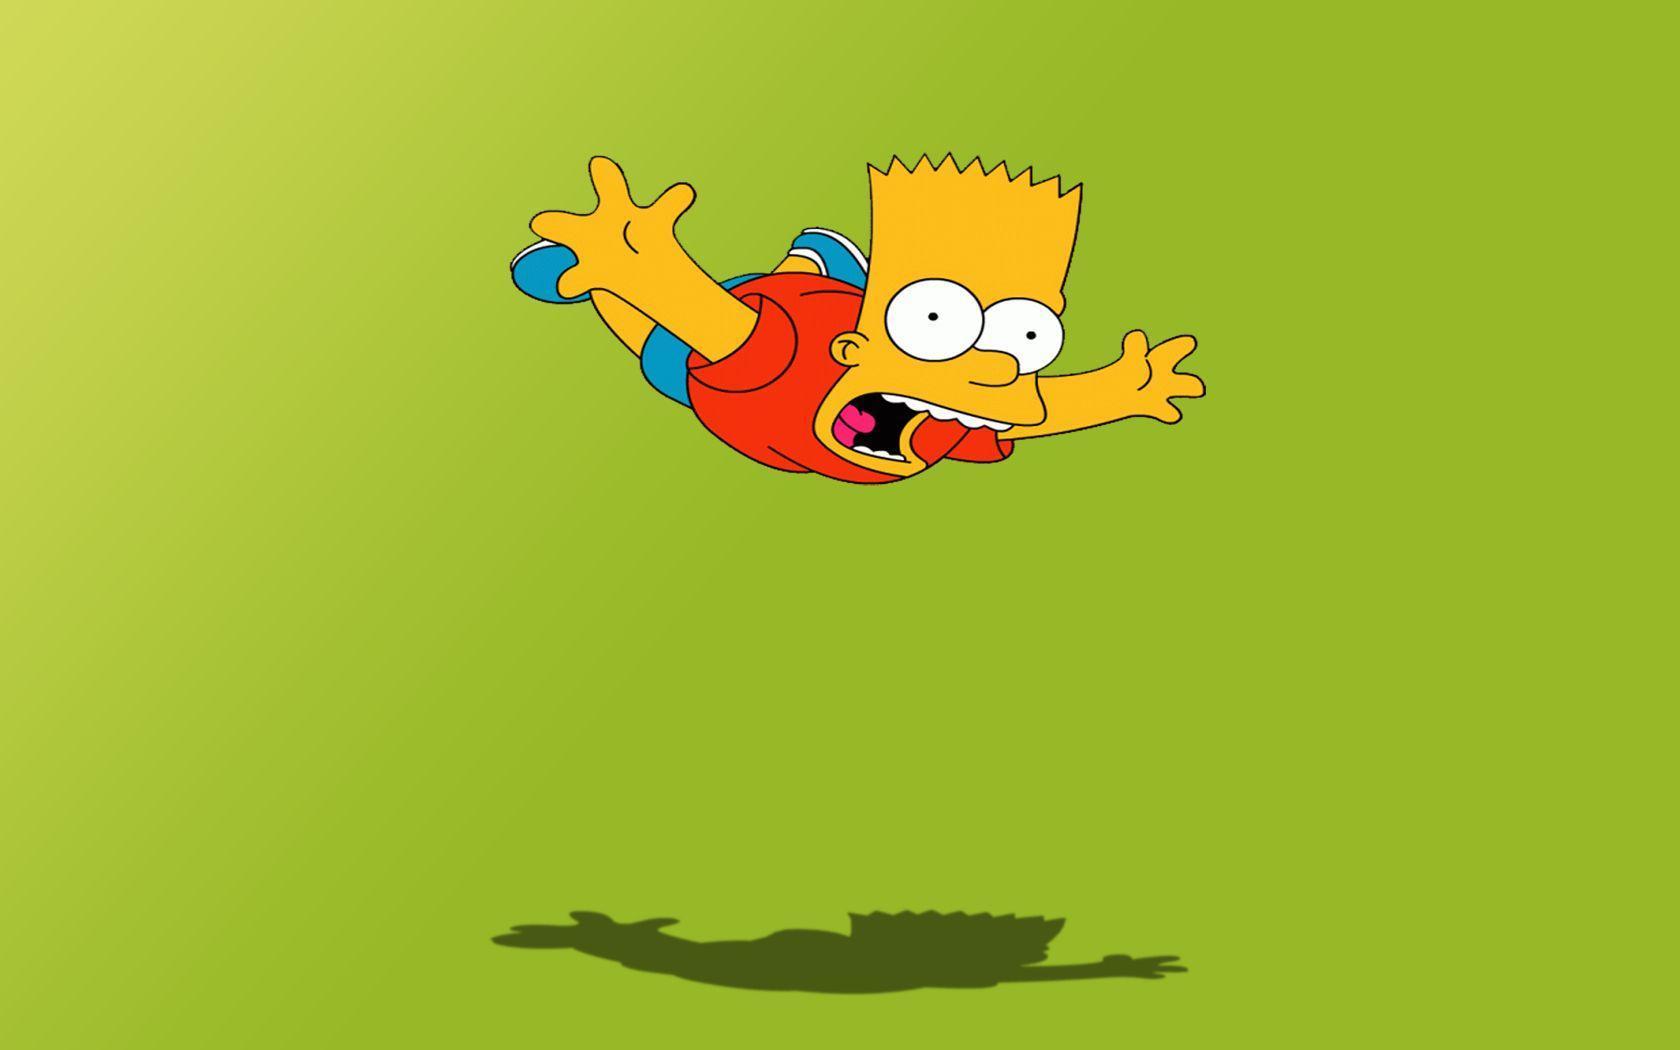 The Simpsons Wallpapers Collection